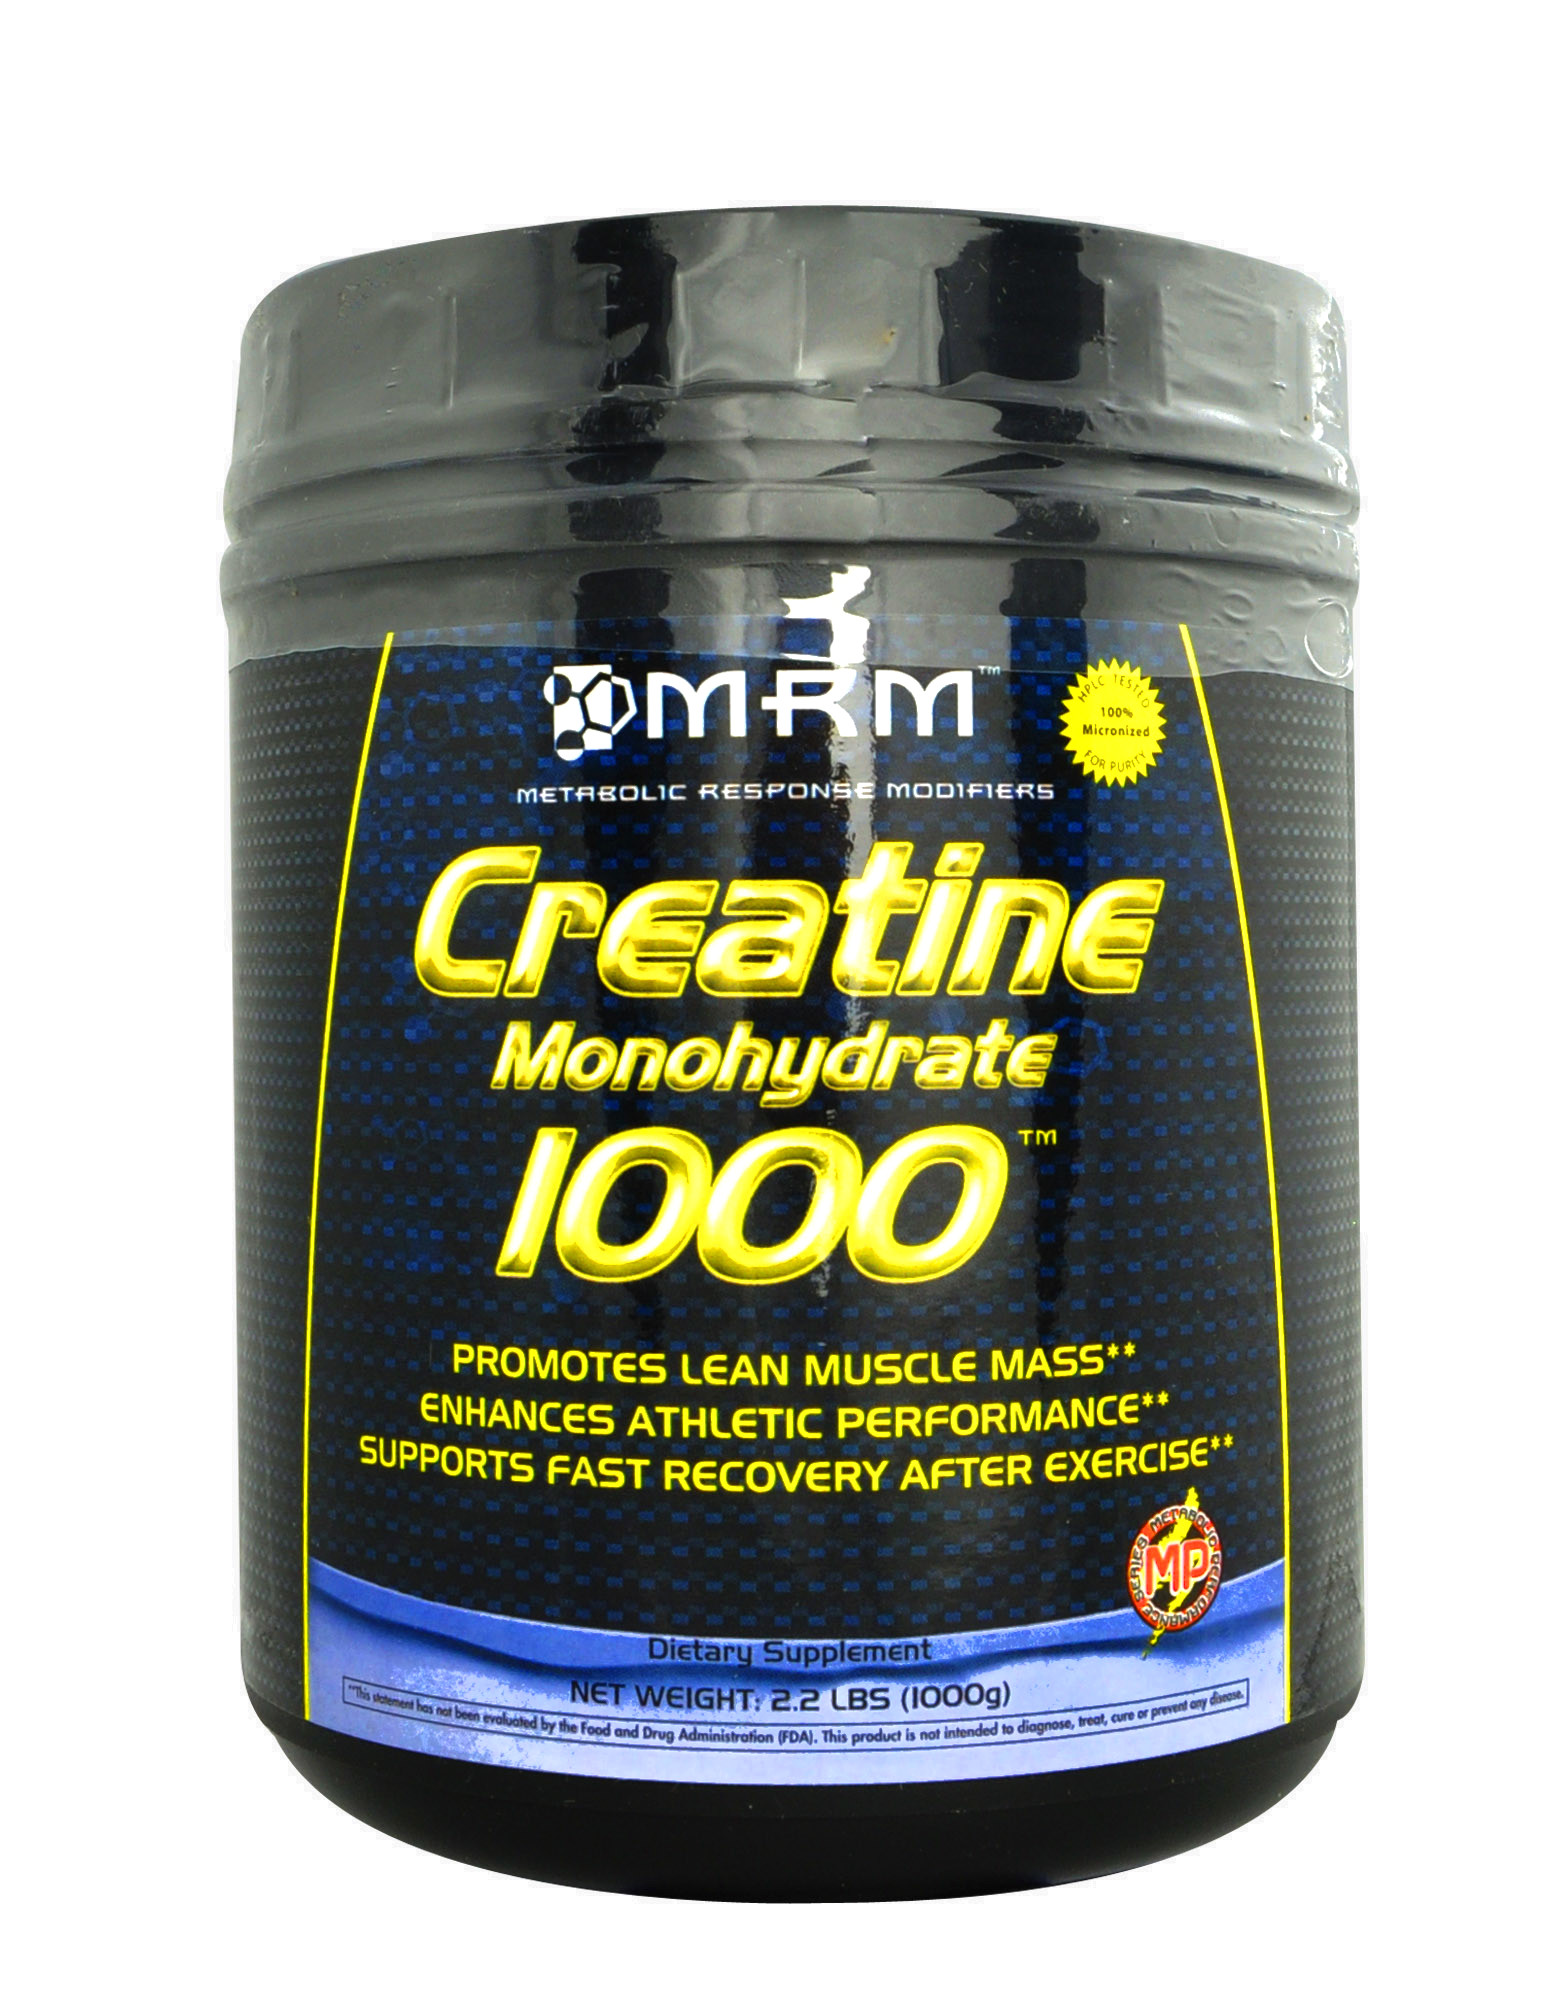 Creatine Monohydrate 1000 by MRM (1000 grams)